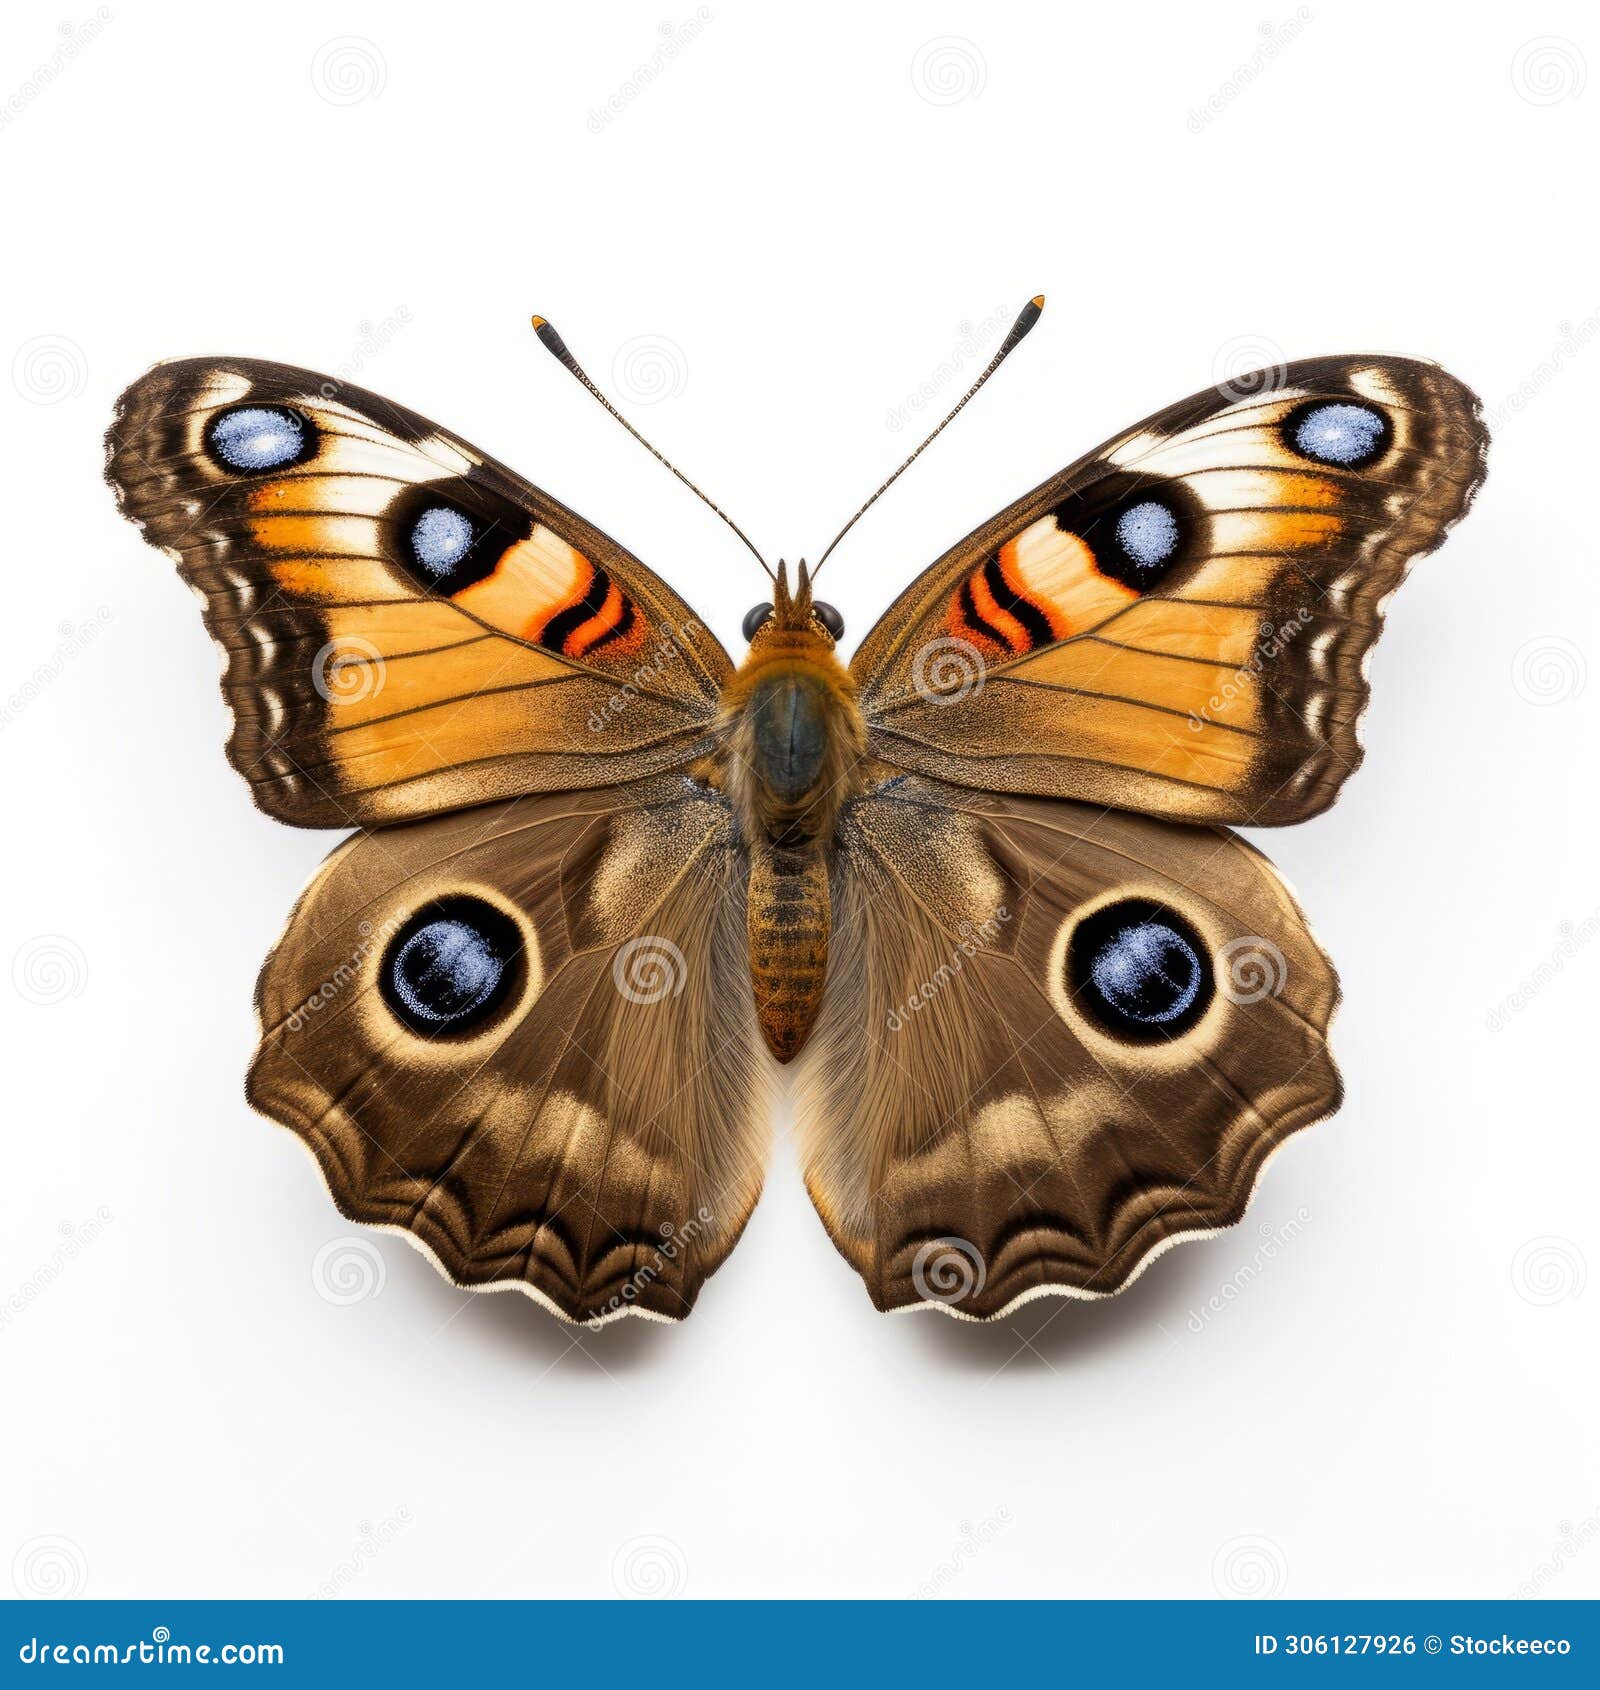 common buckeye butterfly: layered imagery with subtle irony